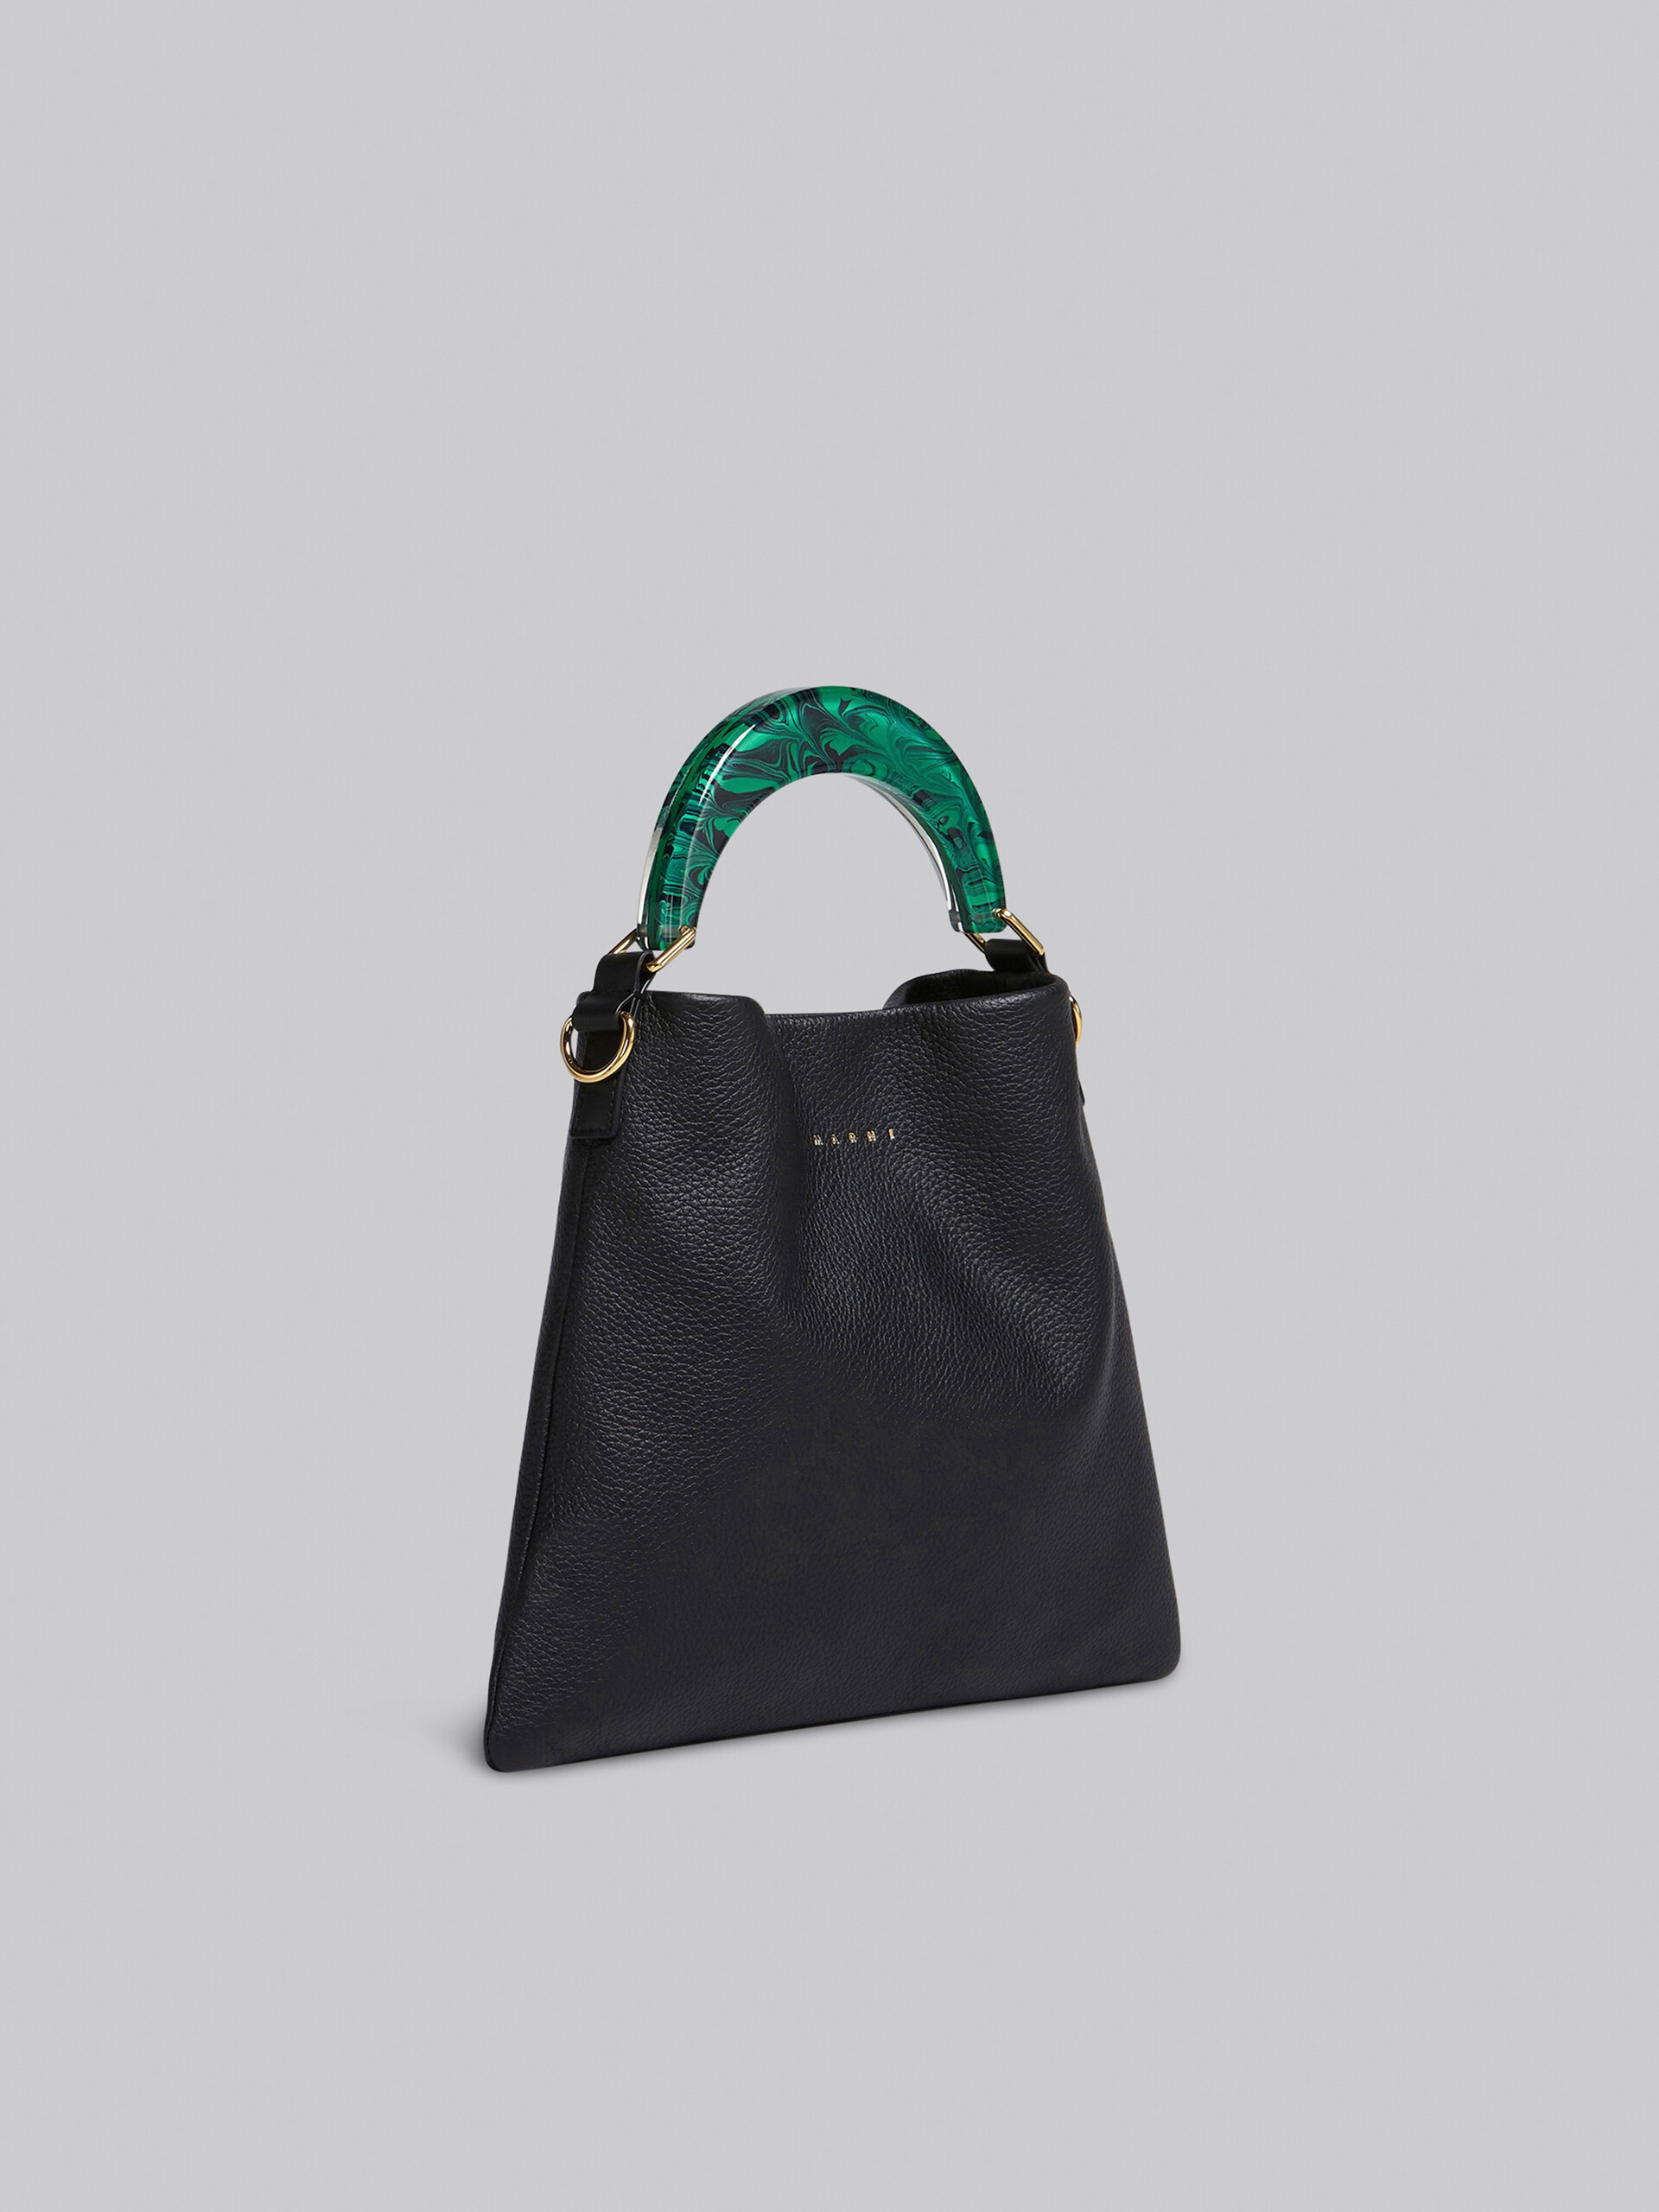 Venice small bag in black leather - Shoulder Bags - Image 6